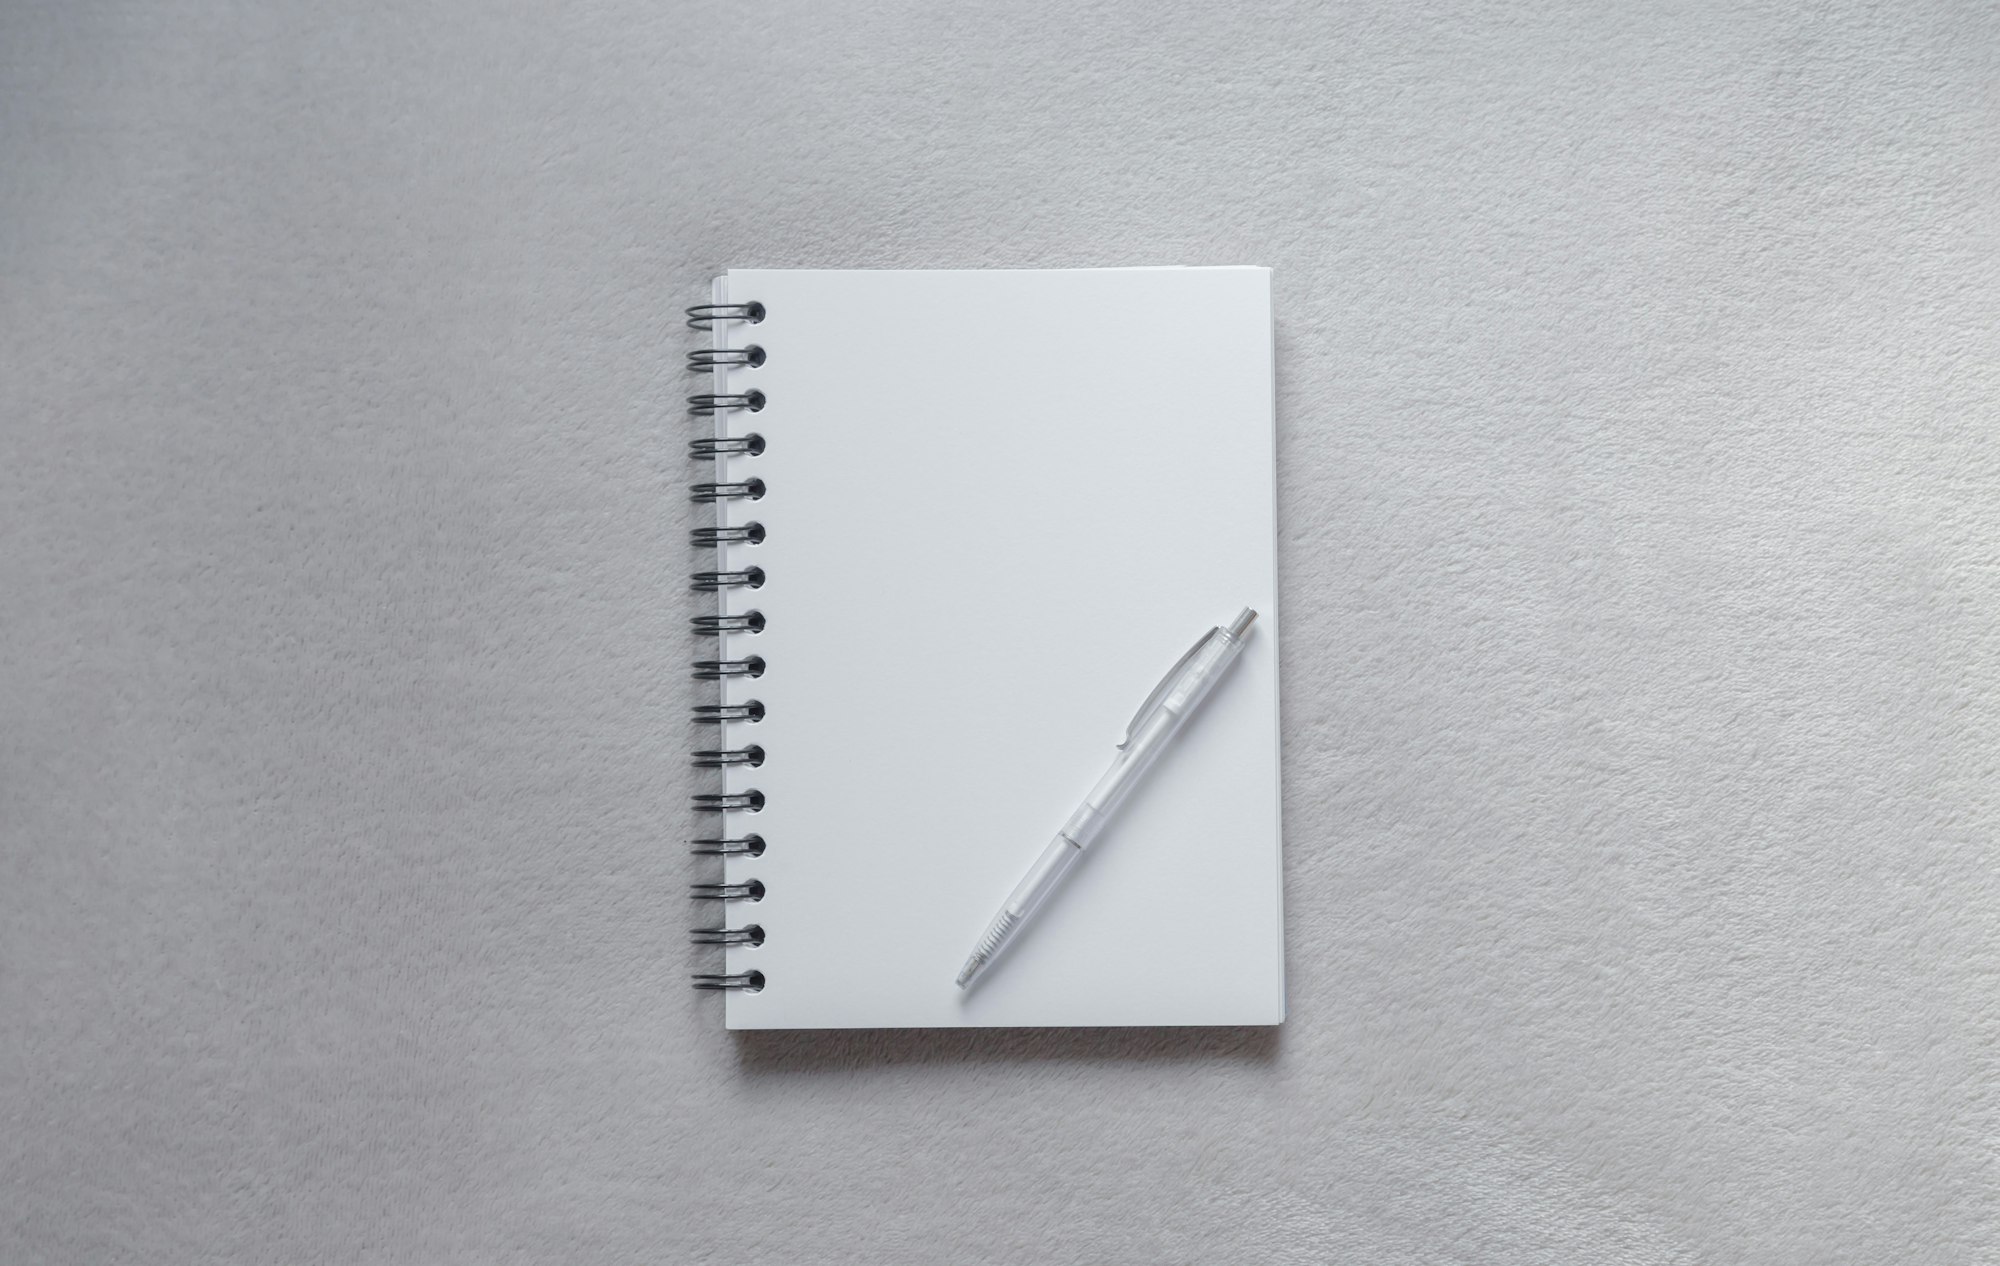 A school, office notebook with a white pen lies on a grey table